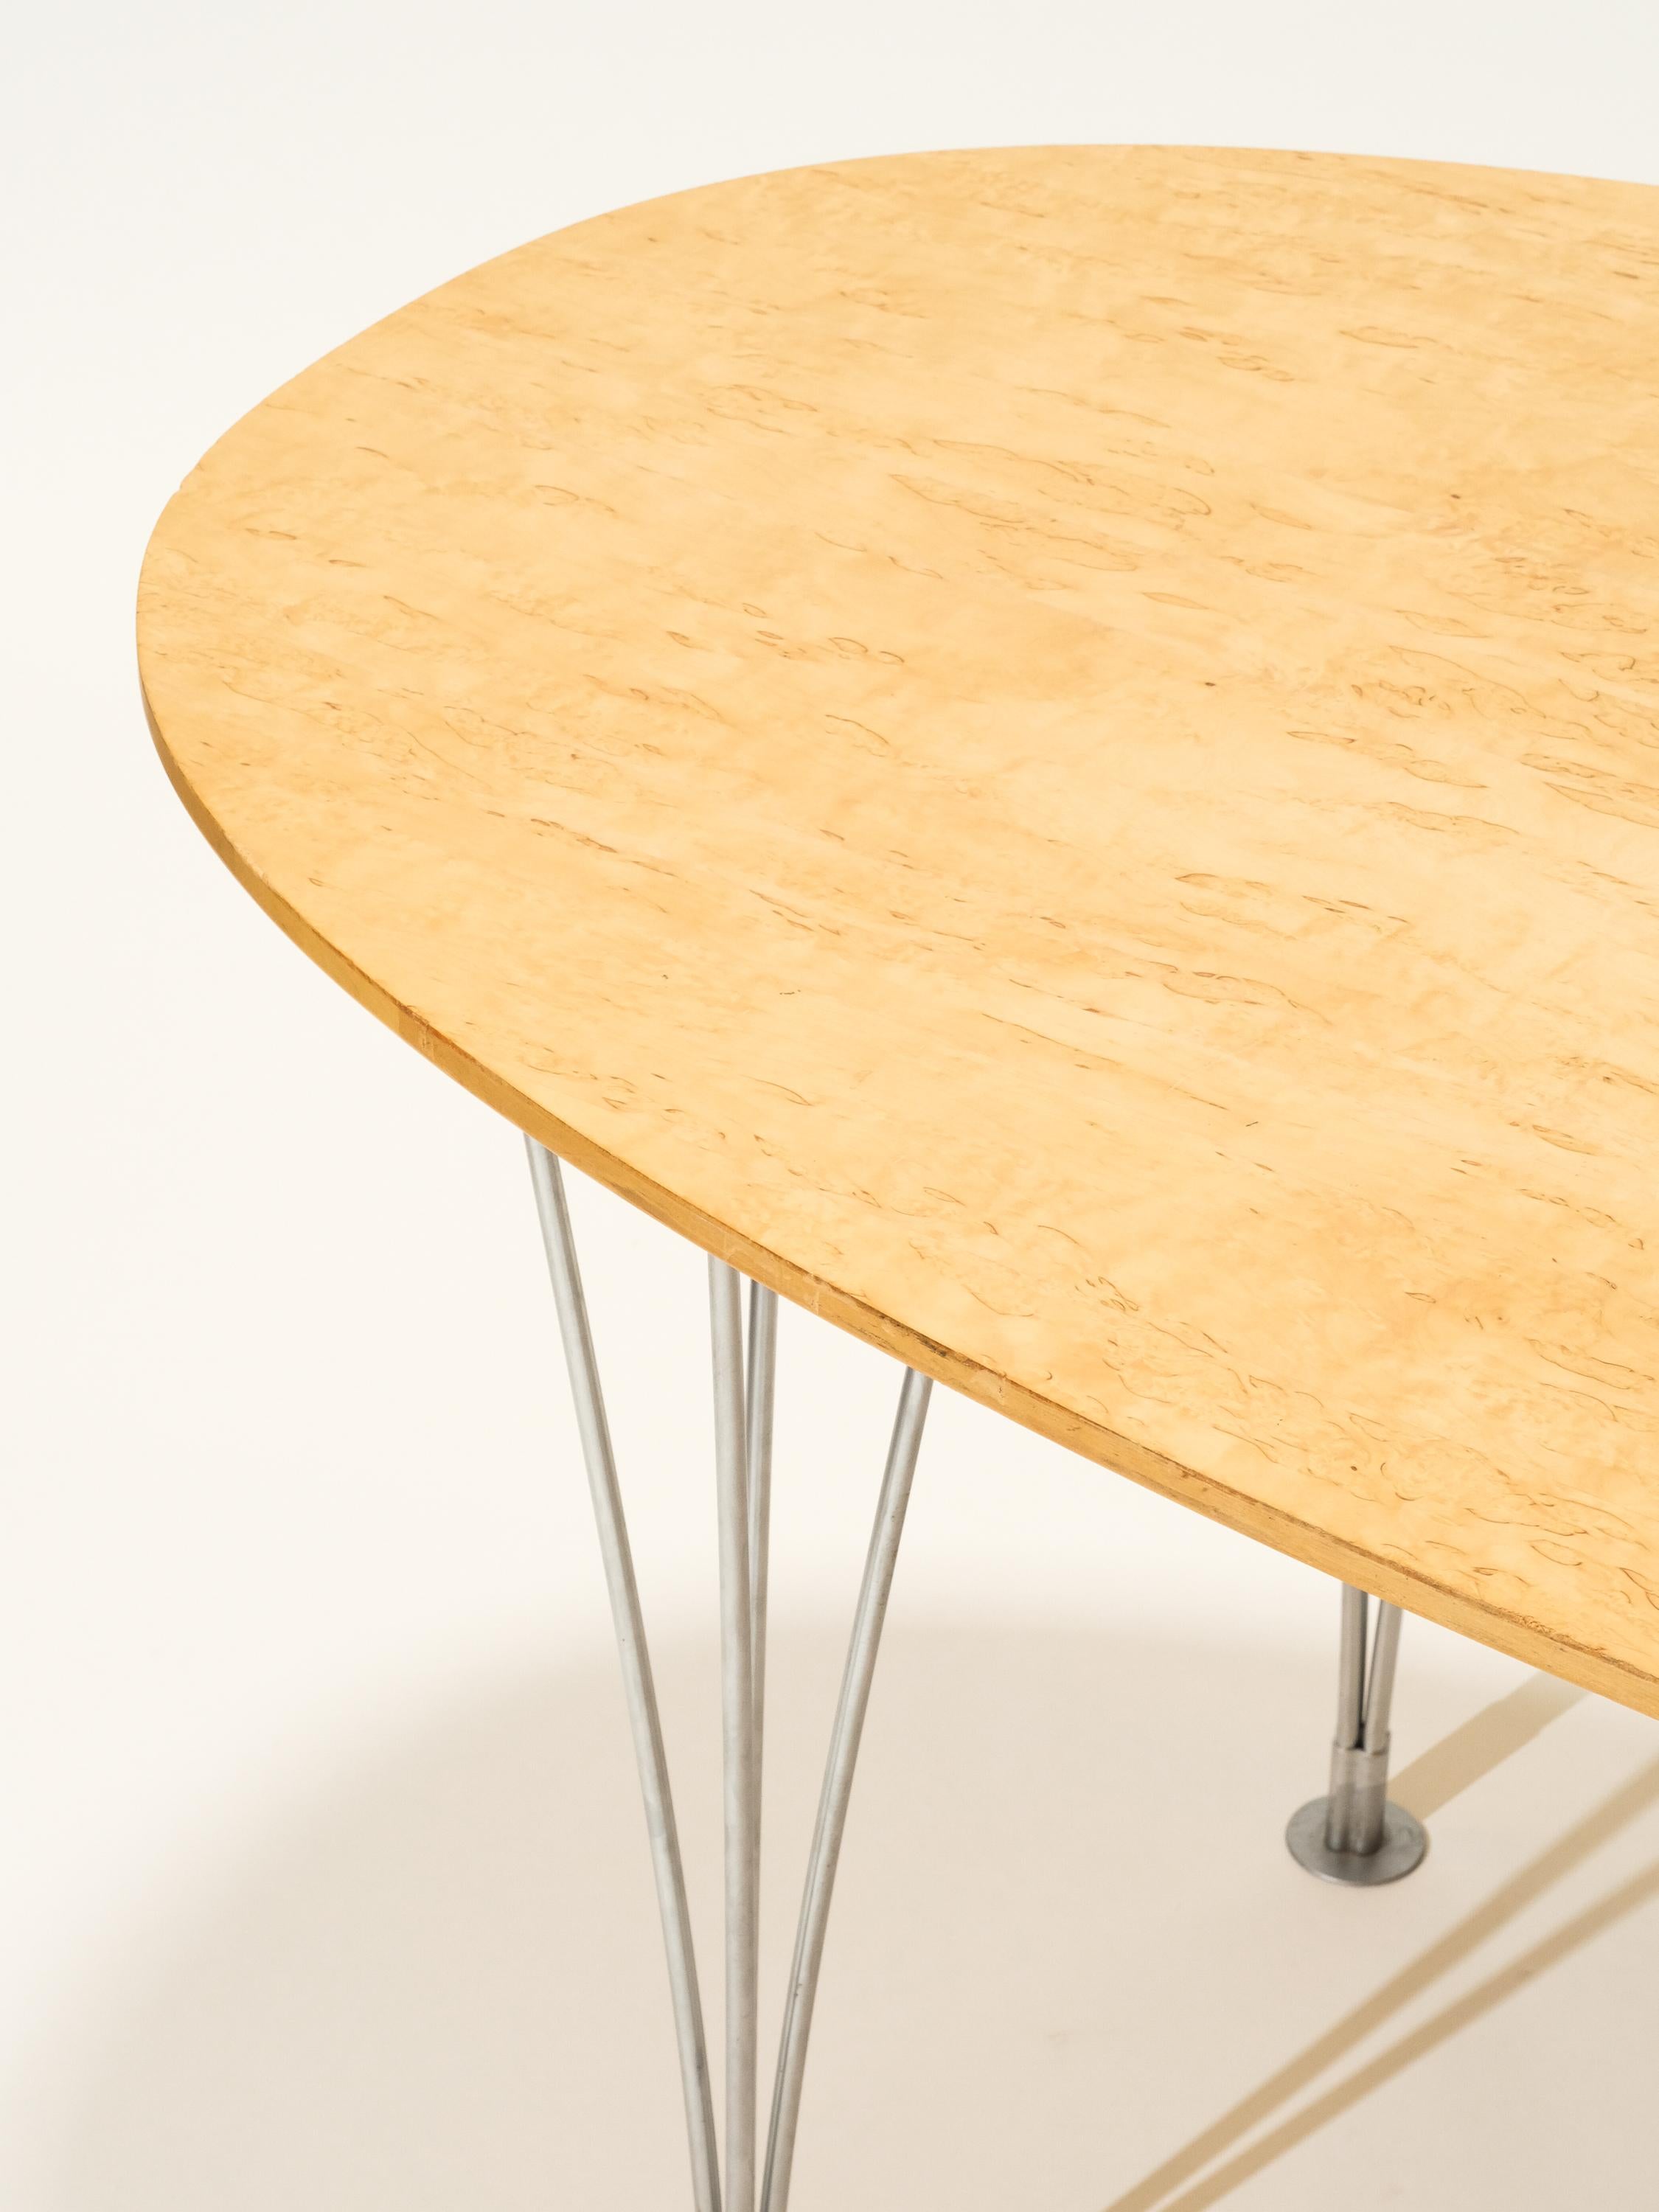 Vintage Super Ellipse Dining Table by Bruno Mathsson in Masur Birch In Good Condition For Sale In Karis, Nyland